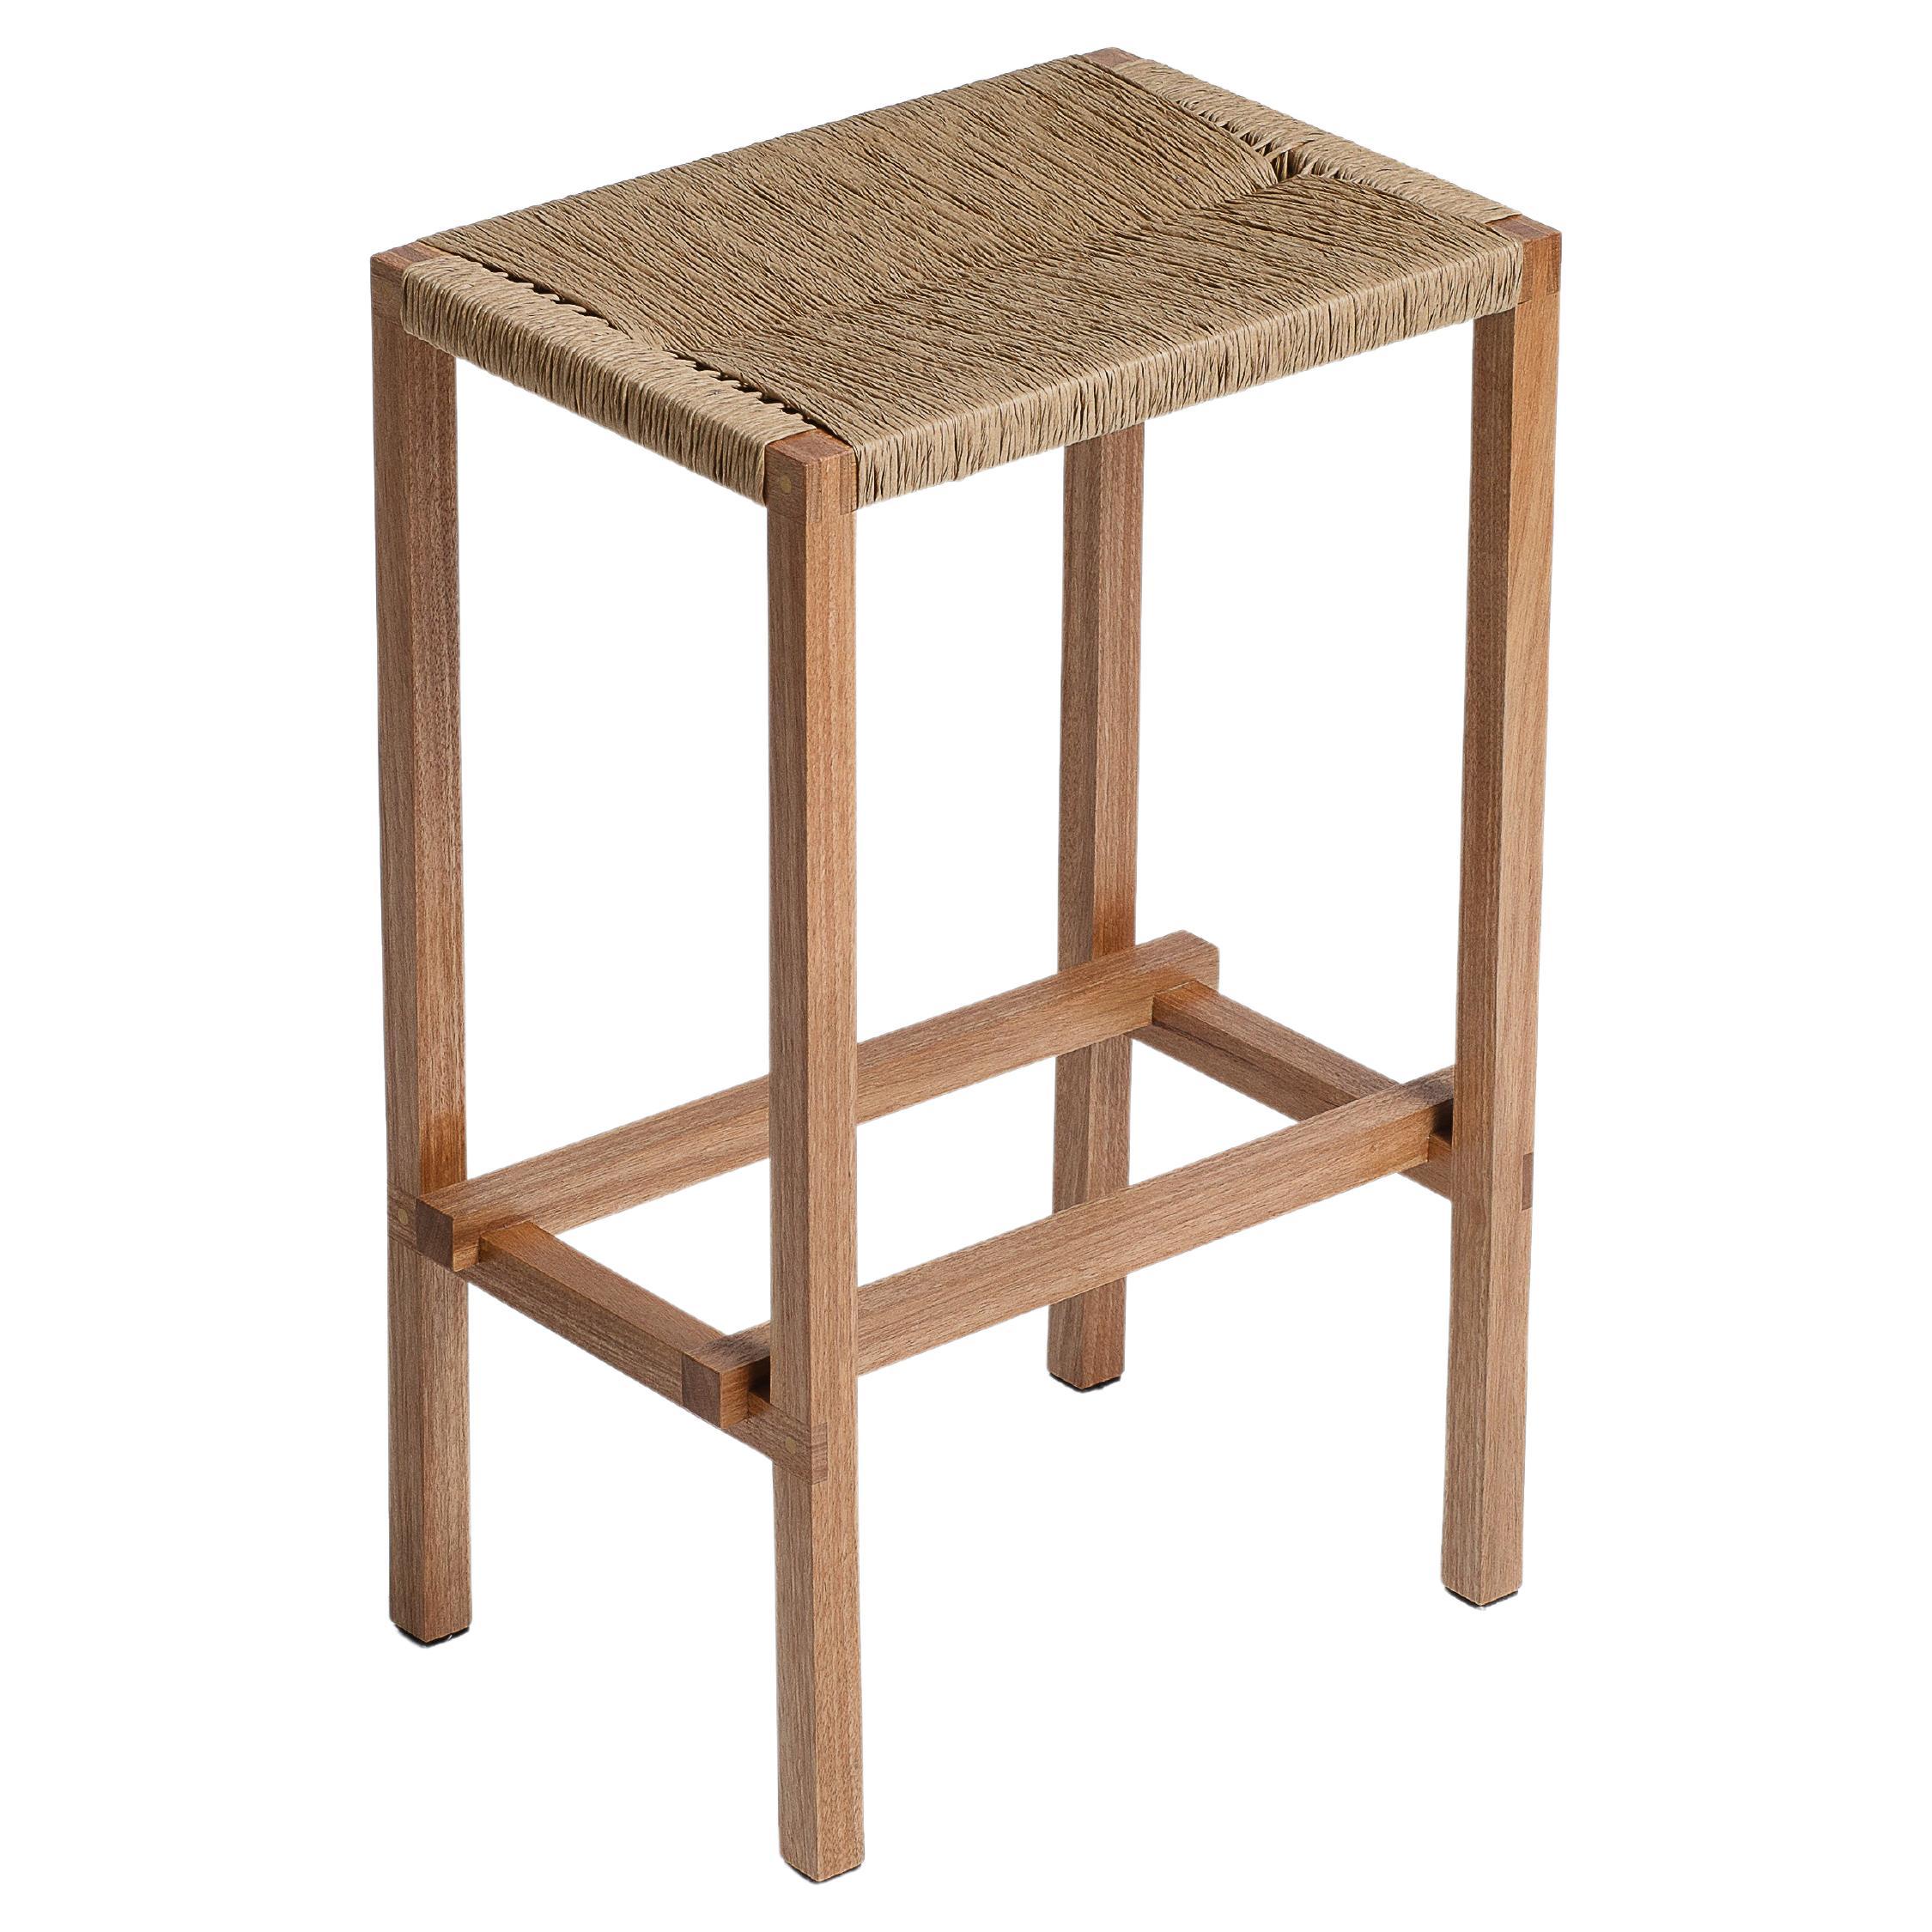 M2 Stool, Woven Seat Contemporary Handcrafted Solid Wood Furniture For Sale